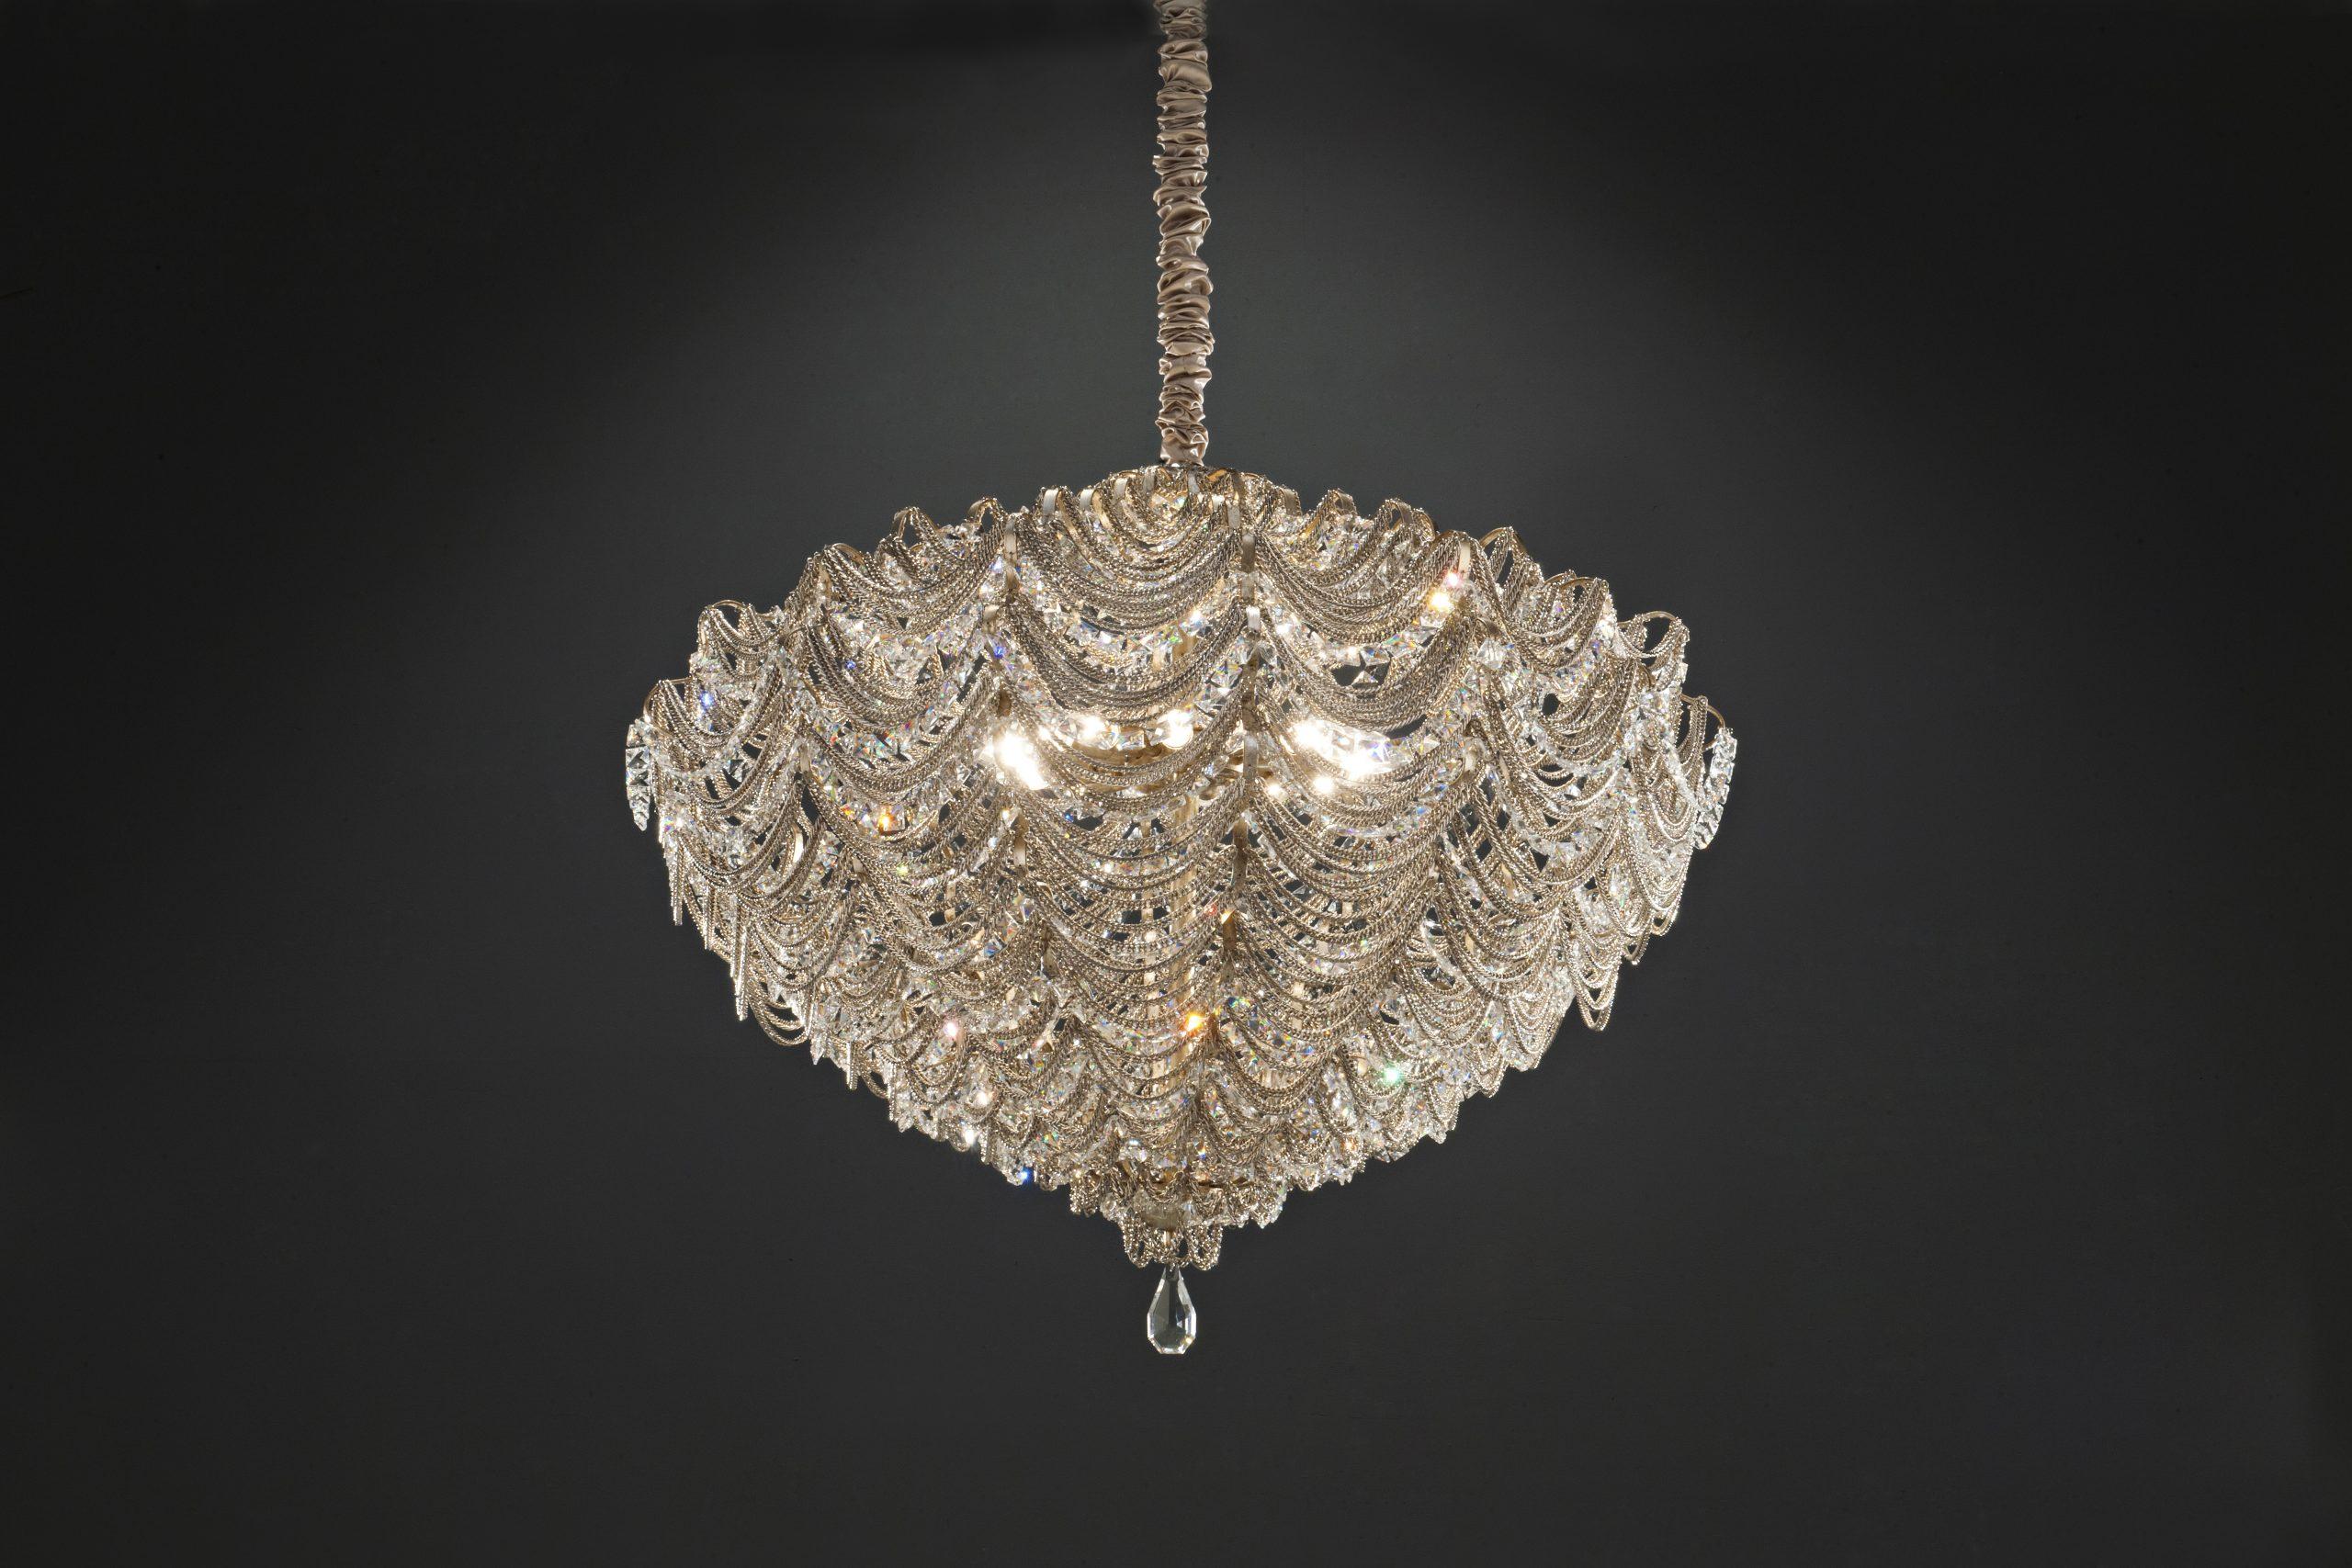 Crystal chandelier lamp 110 by Aver
Dimensions: D 110 x H 85 cm 
Materials: Natural clear crystals, nickel.
Lighting: 16 x E14
Available in other sizes.

All our lamps can be wired according to each country. If sold to the USA it will be wired for